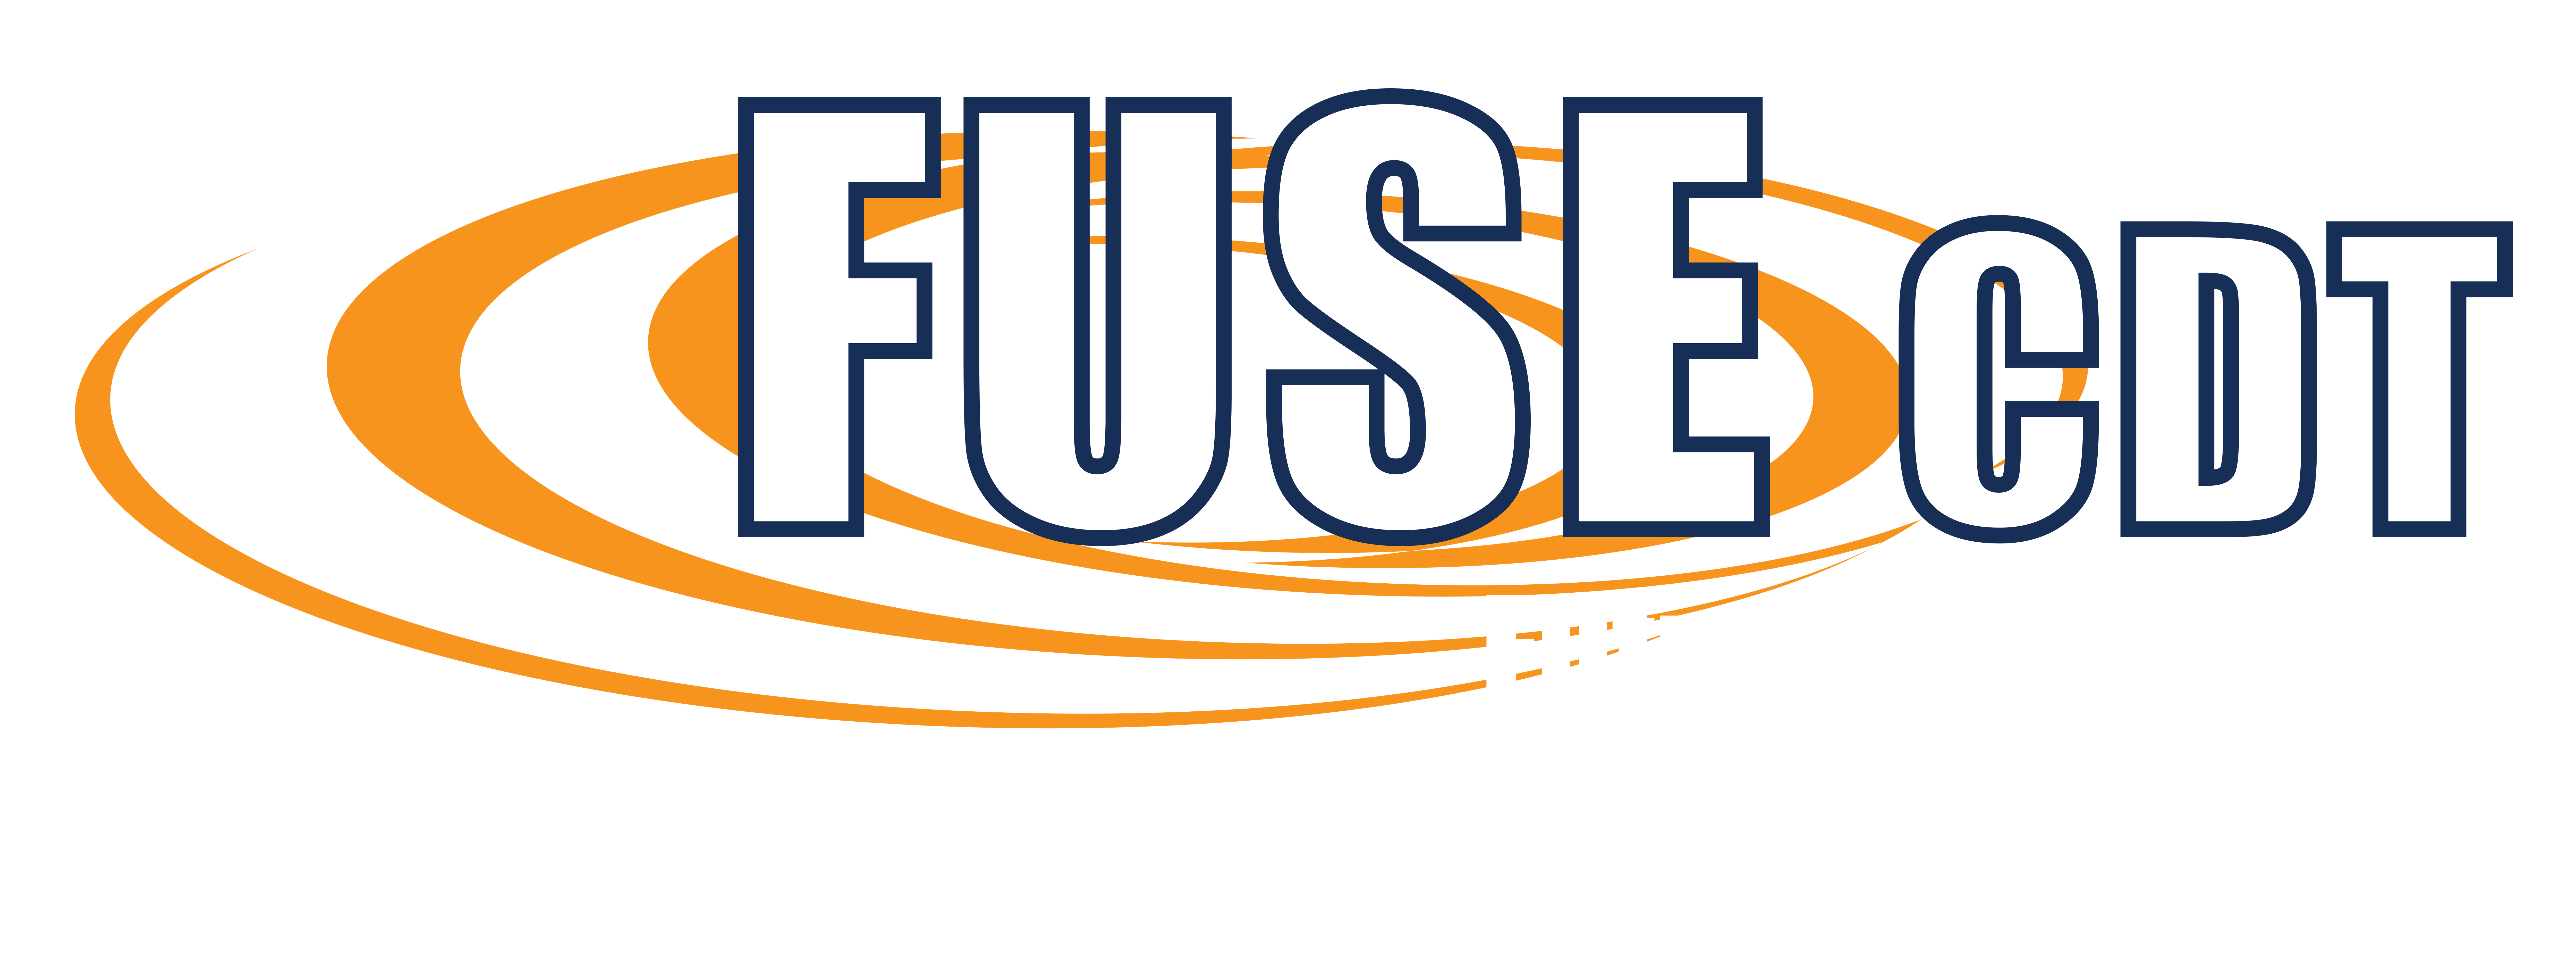 The logo for the Centre for Doctoral Training in Future Ultrasonic Engineering. The acronym FUSE CDT over the words Future Ultrasonic Engineering in white over orange swooshes.